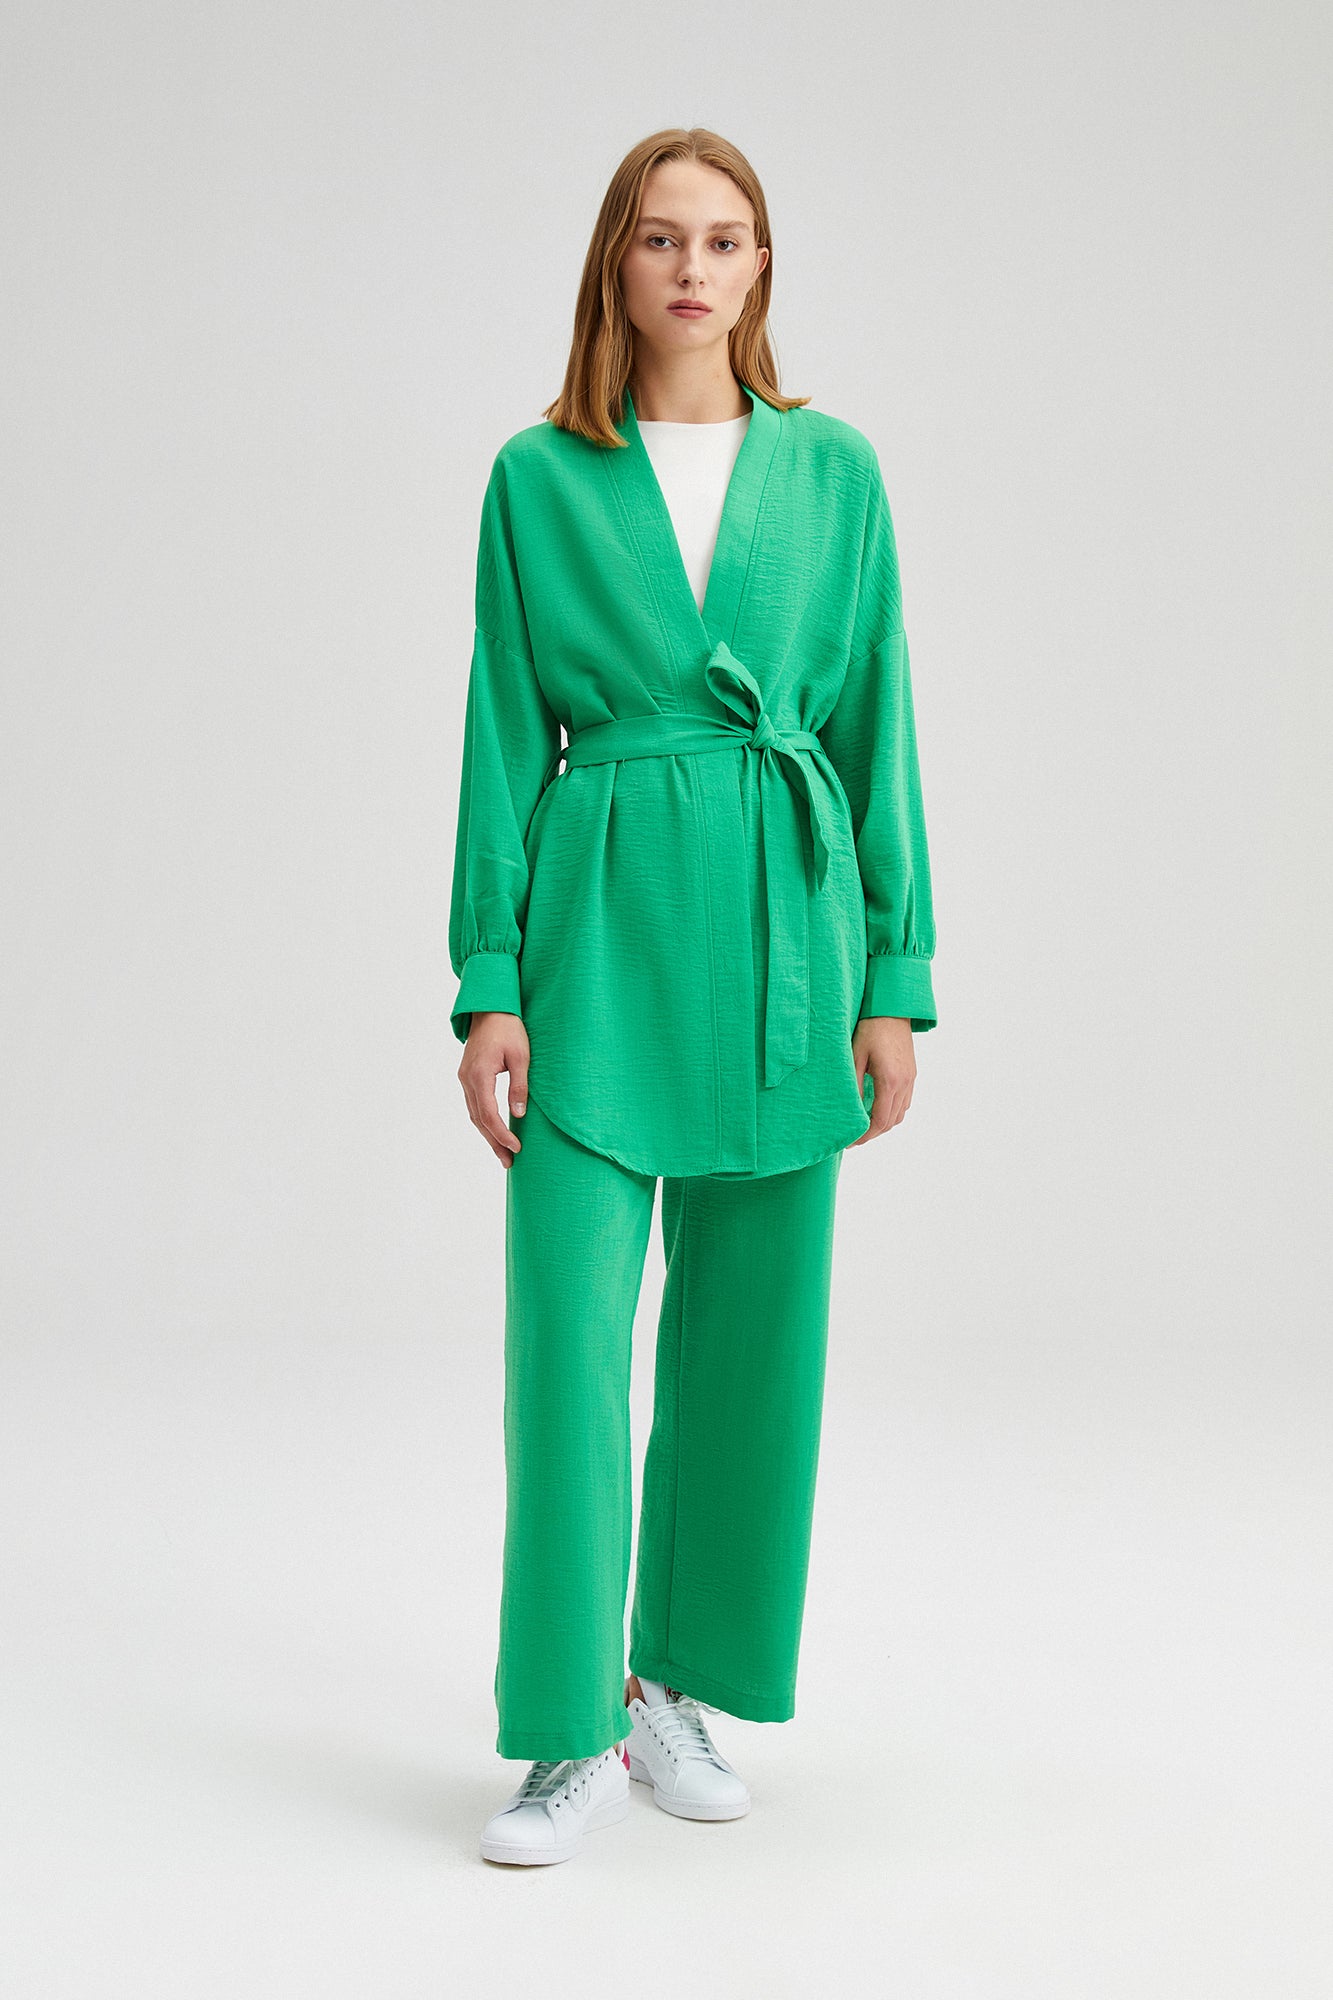 A model wears TOU11403 - Kimono Trousers Two Piece Set - Green, wholesale Suit of Touche Prive to display at Lonca